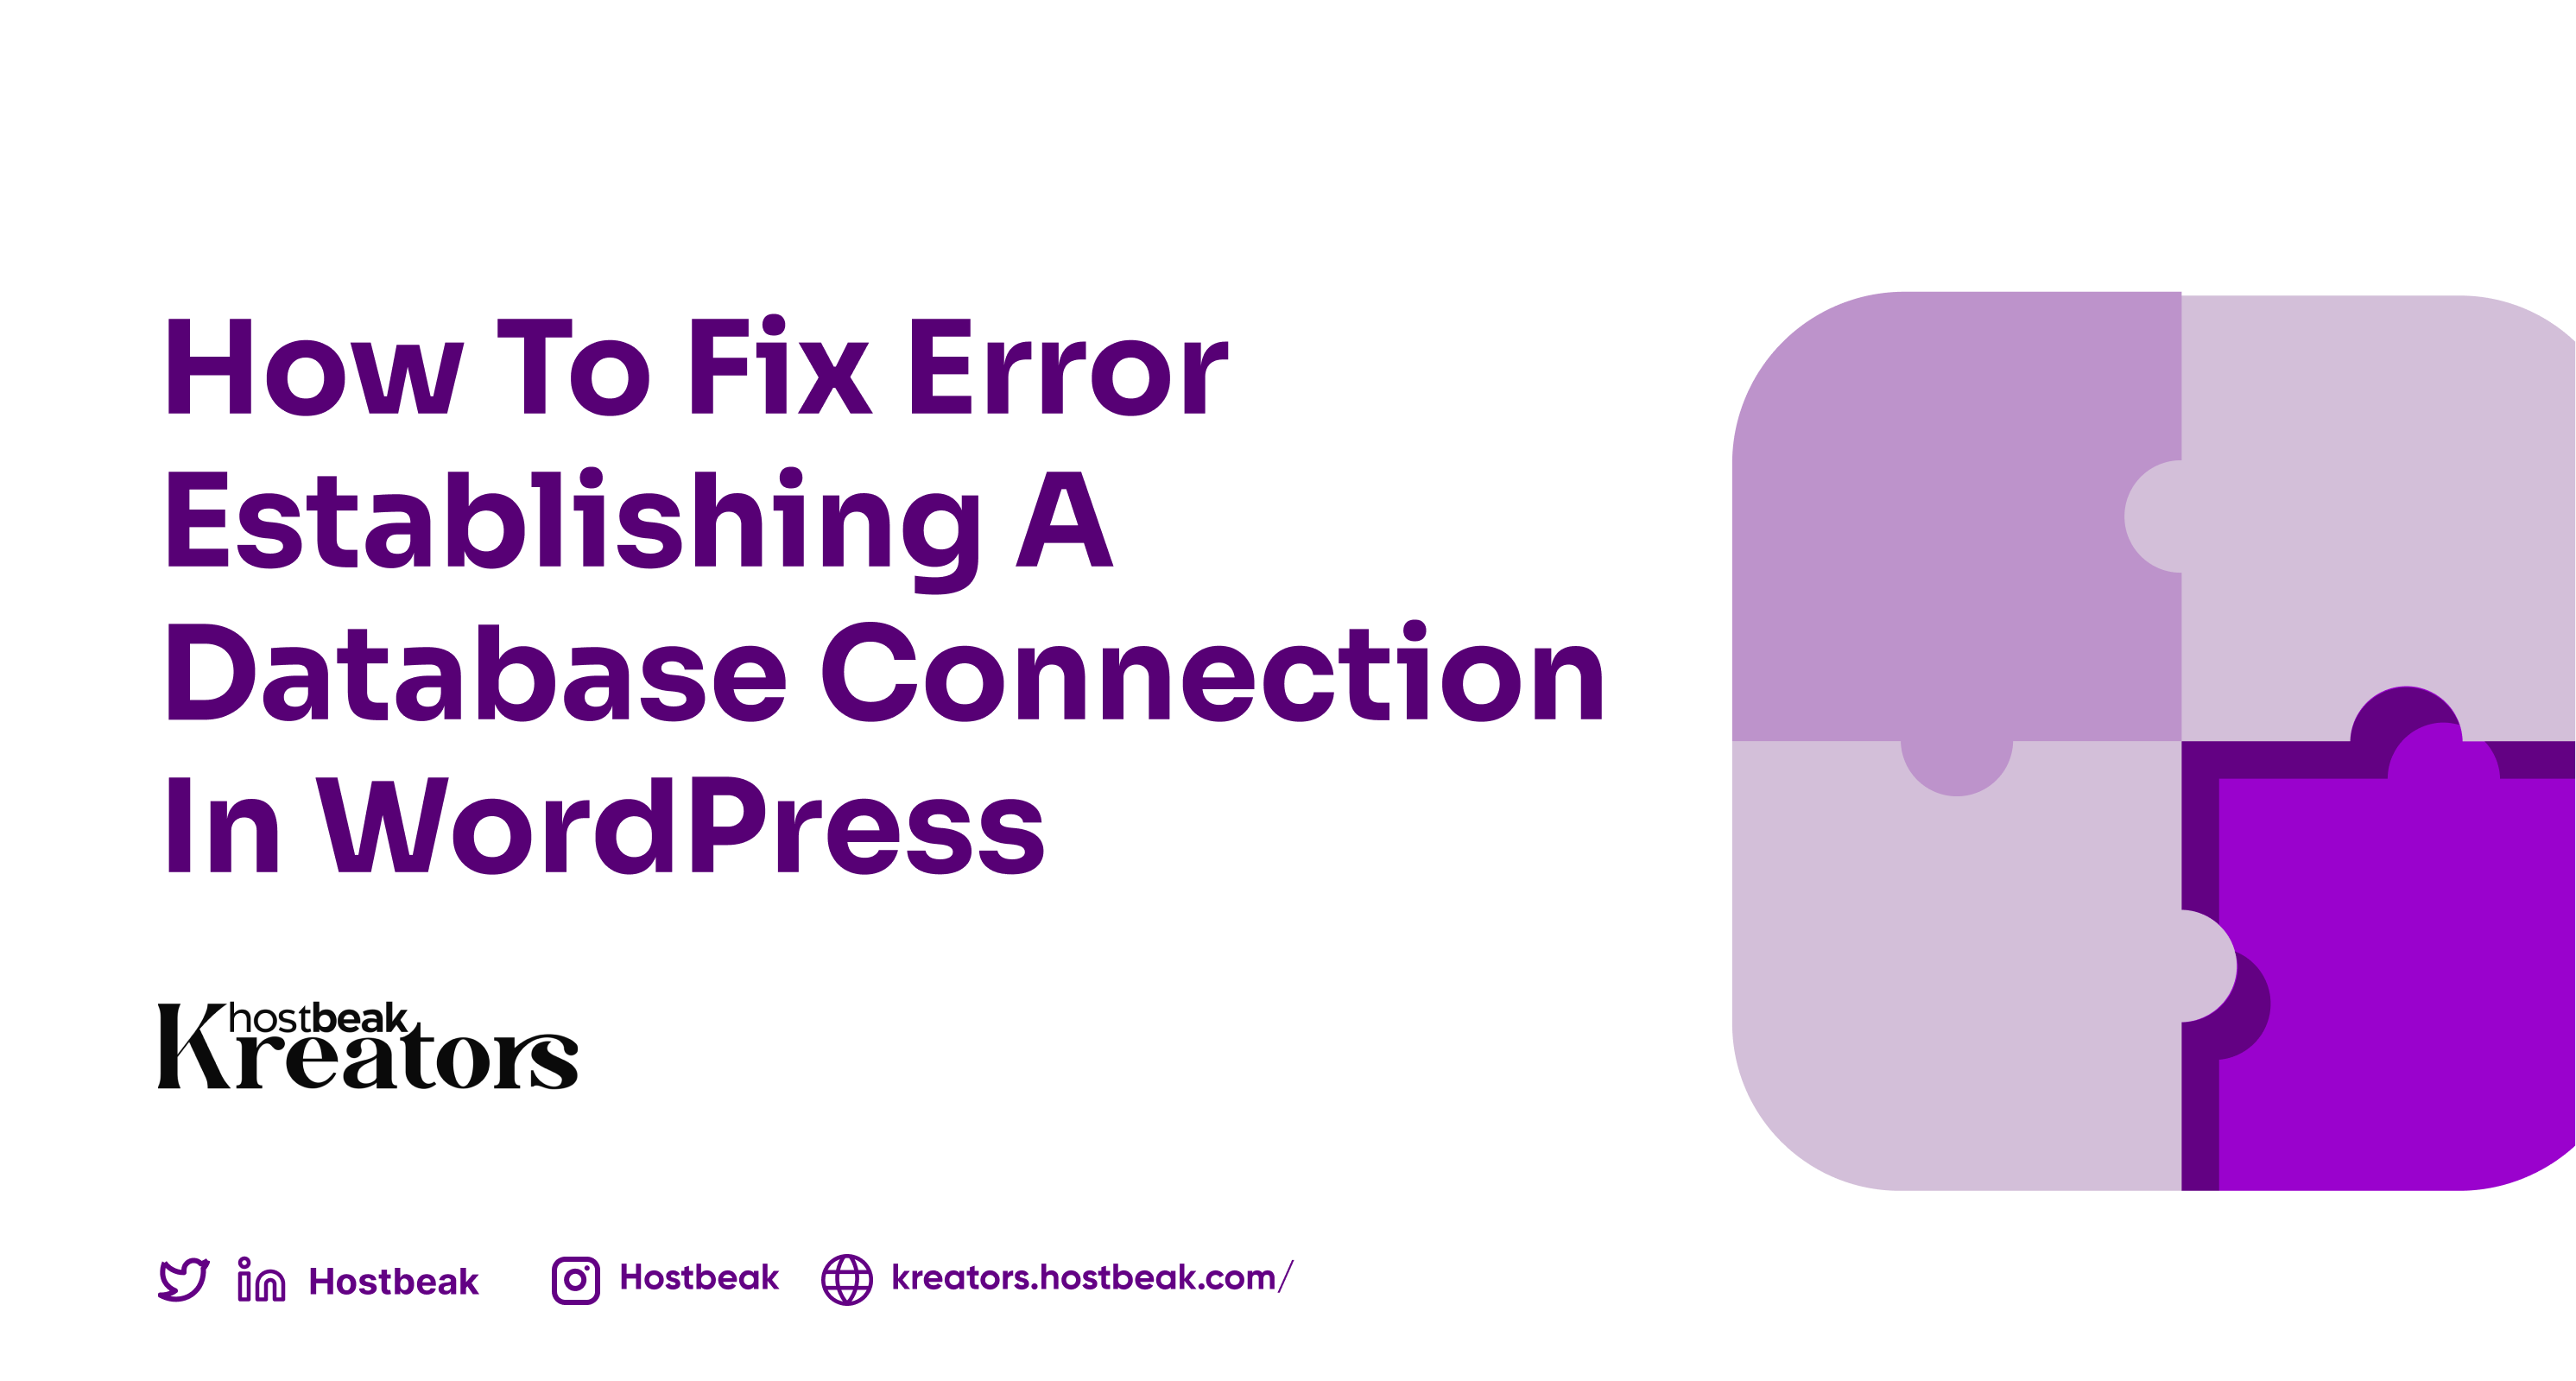 How to fix error establishing a database connection in WordPress